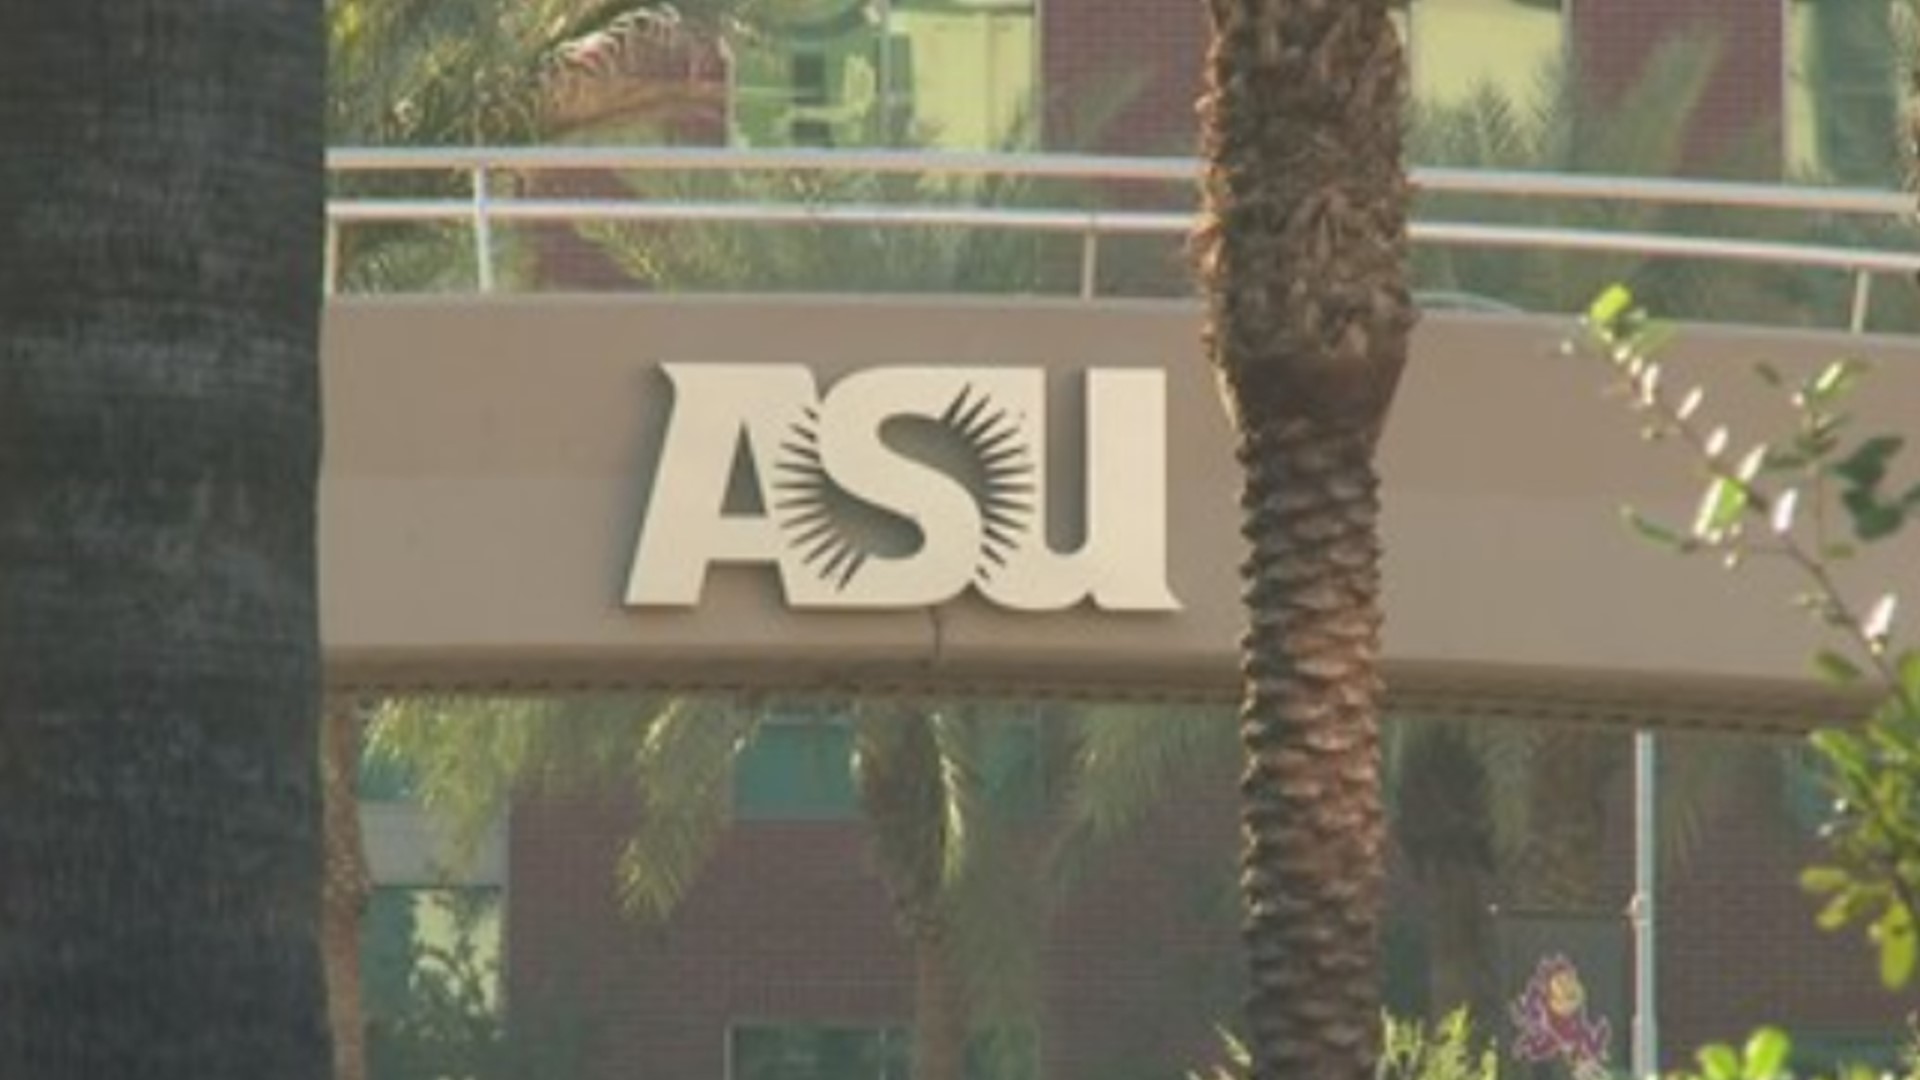 Justin Avery was arrested Thursday and charged with attacking several women on ASU's Tempe campus. Watch the video above for more details.